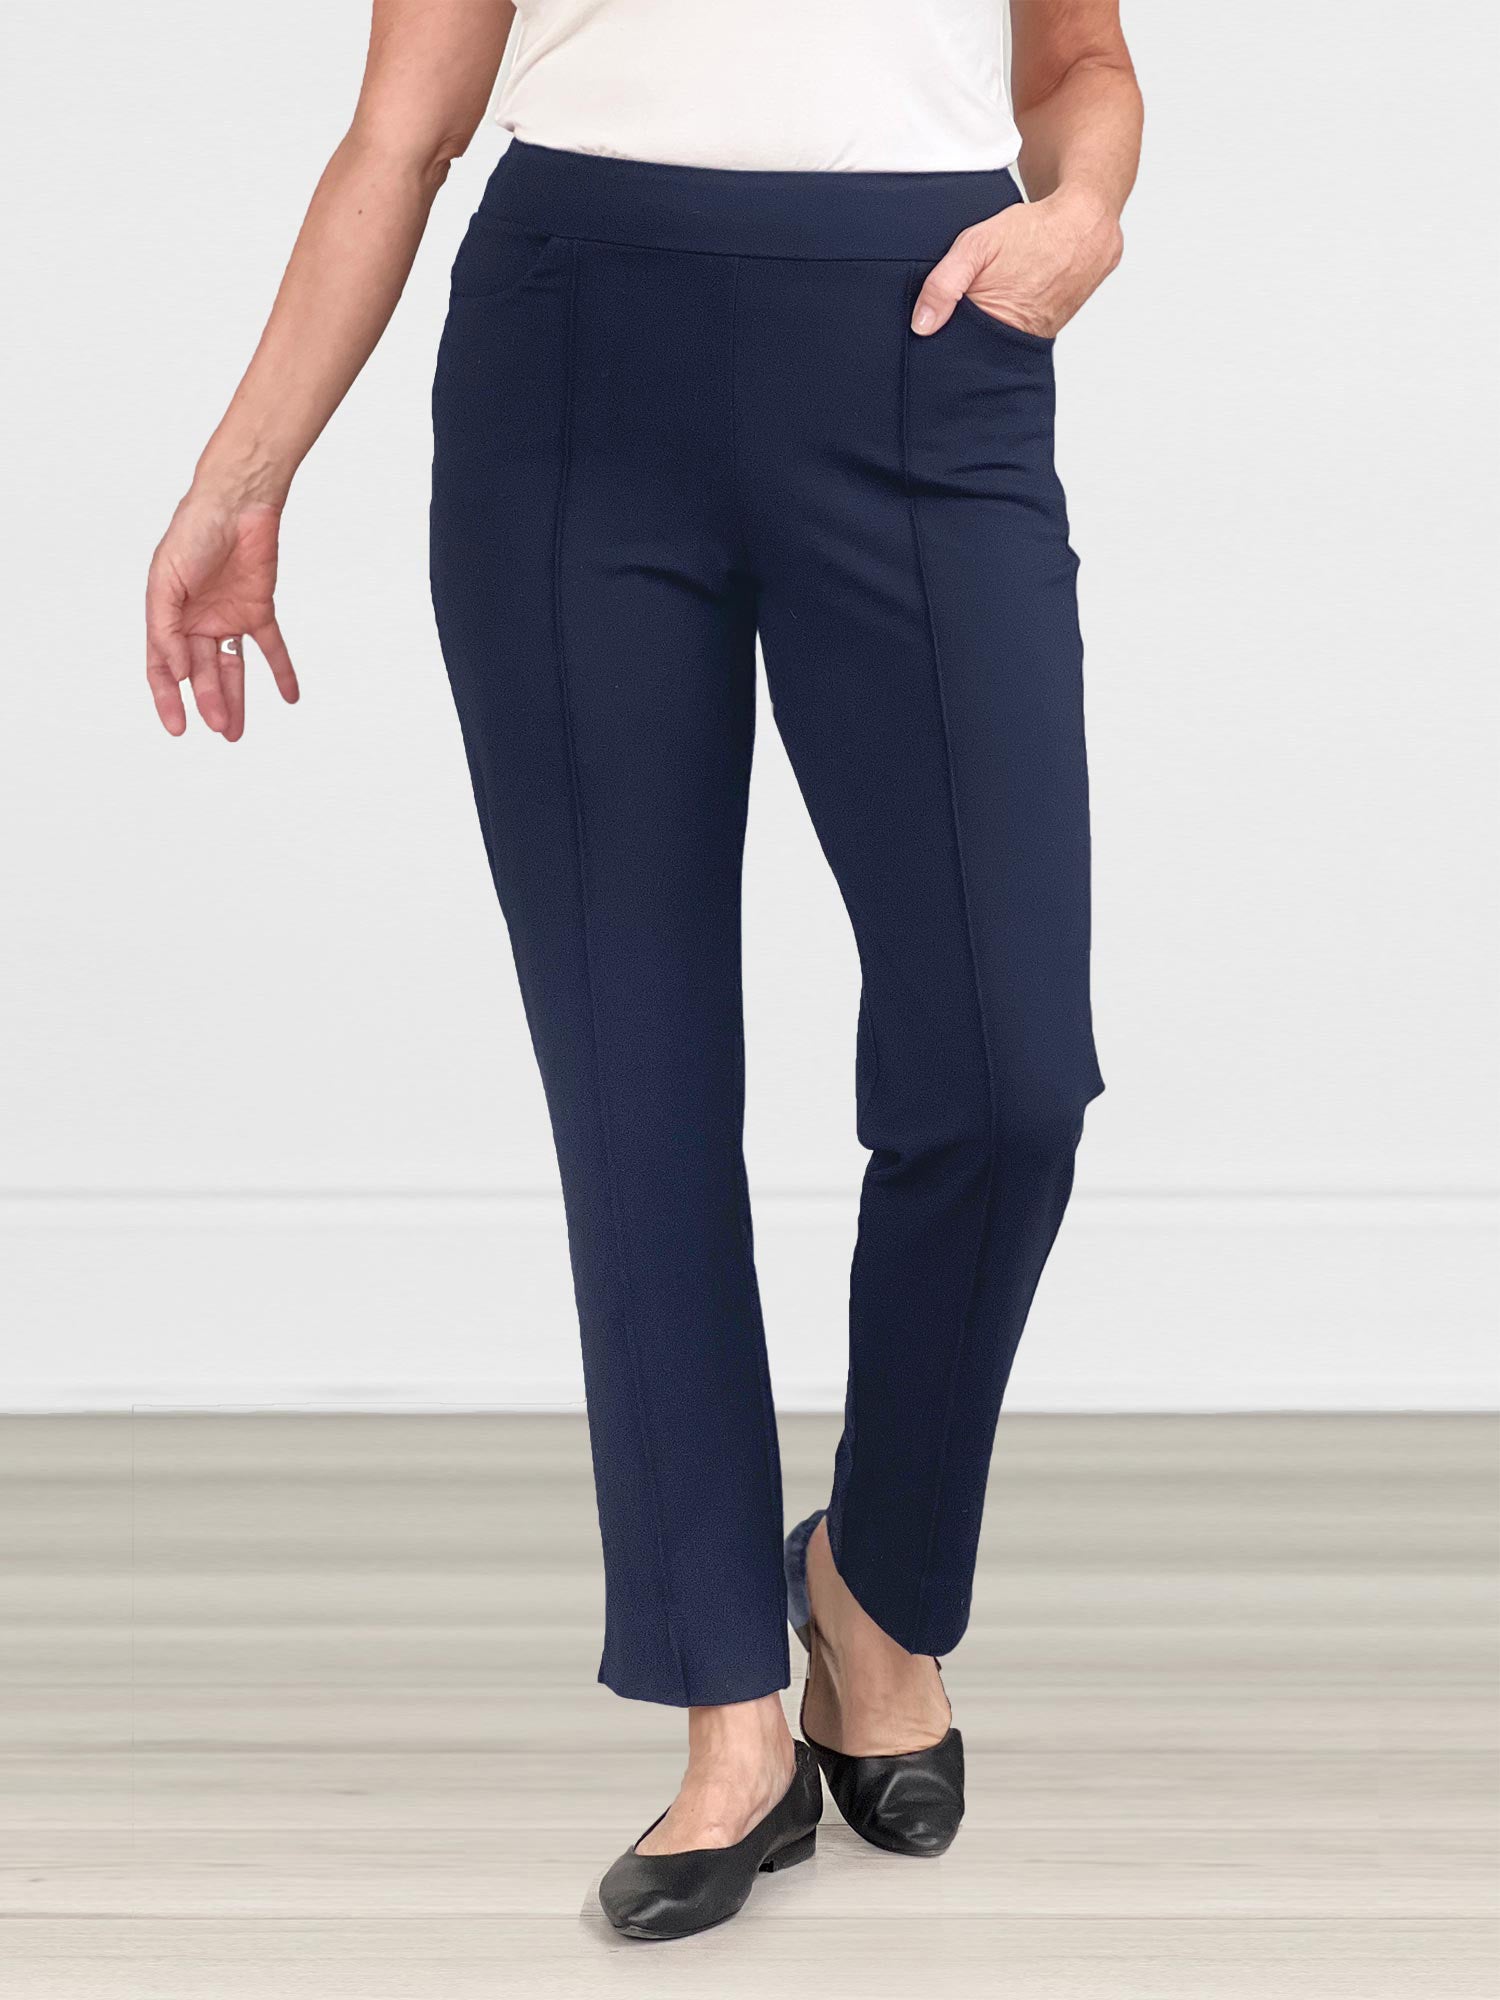 Restock ** Ultimate Comfort Stretch Leggings – Twisted Label Boutique